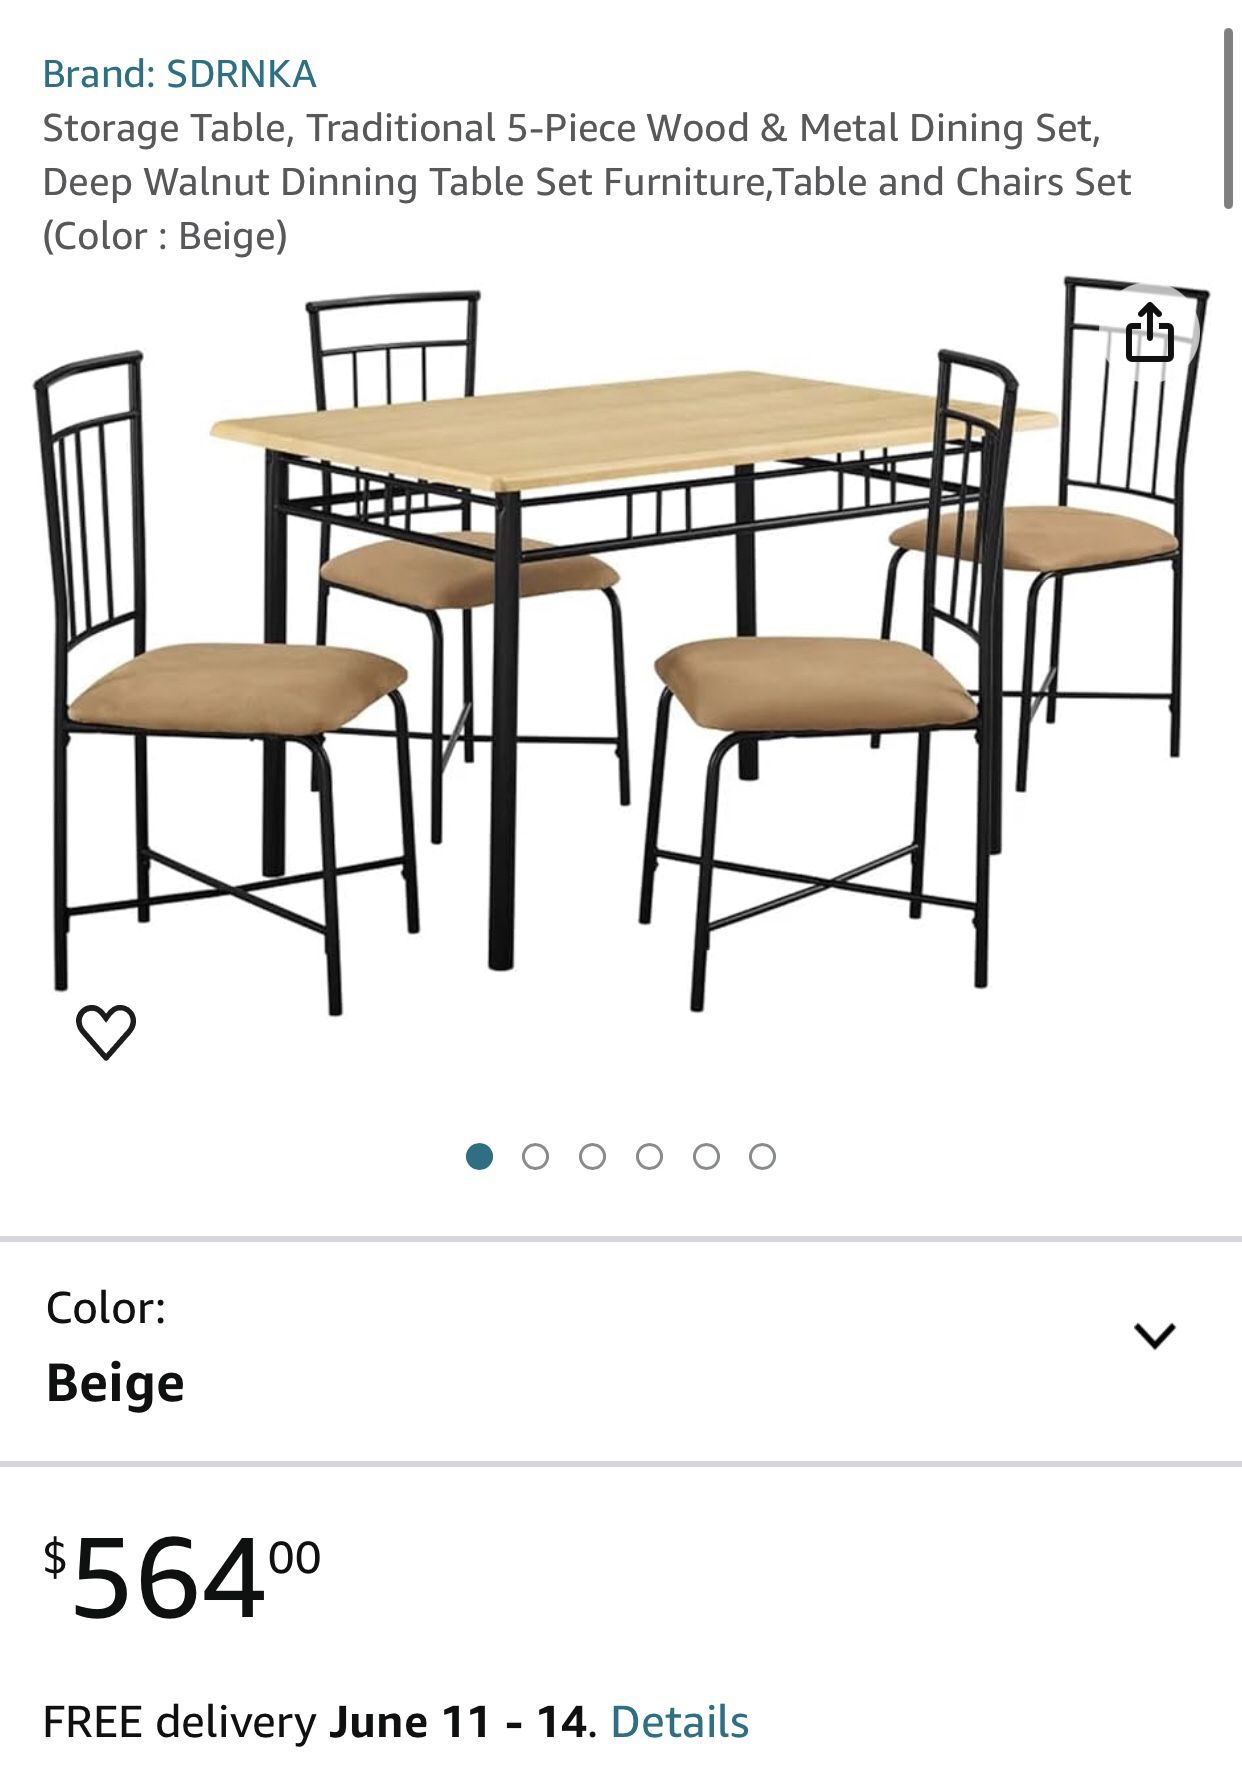 Storage Table, Traditional 5-Piece Wood & Metal Dining Set, Deep Walnut Dinning Table Set Furniture,Table and Chairs Set 